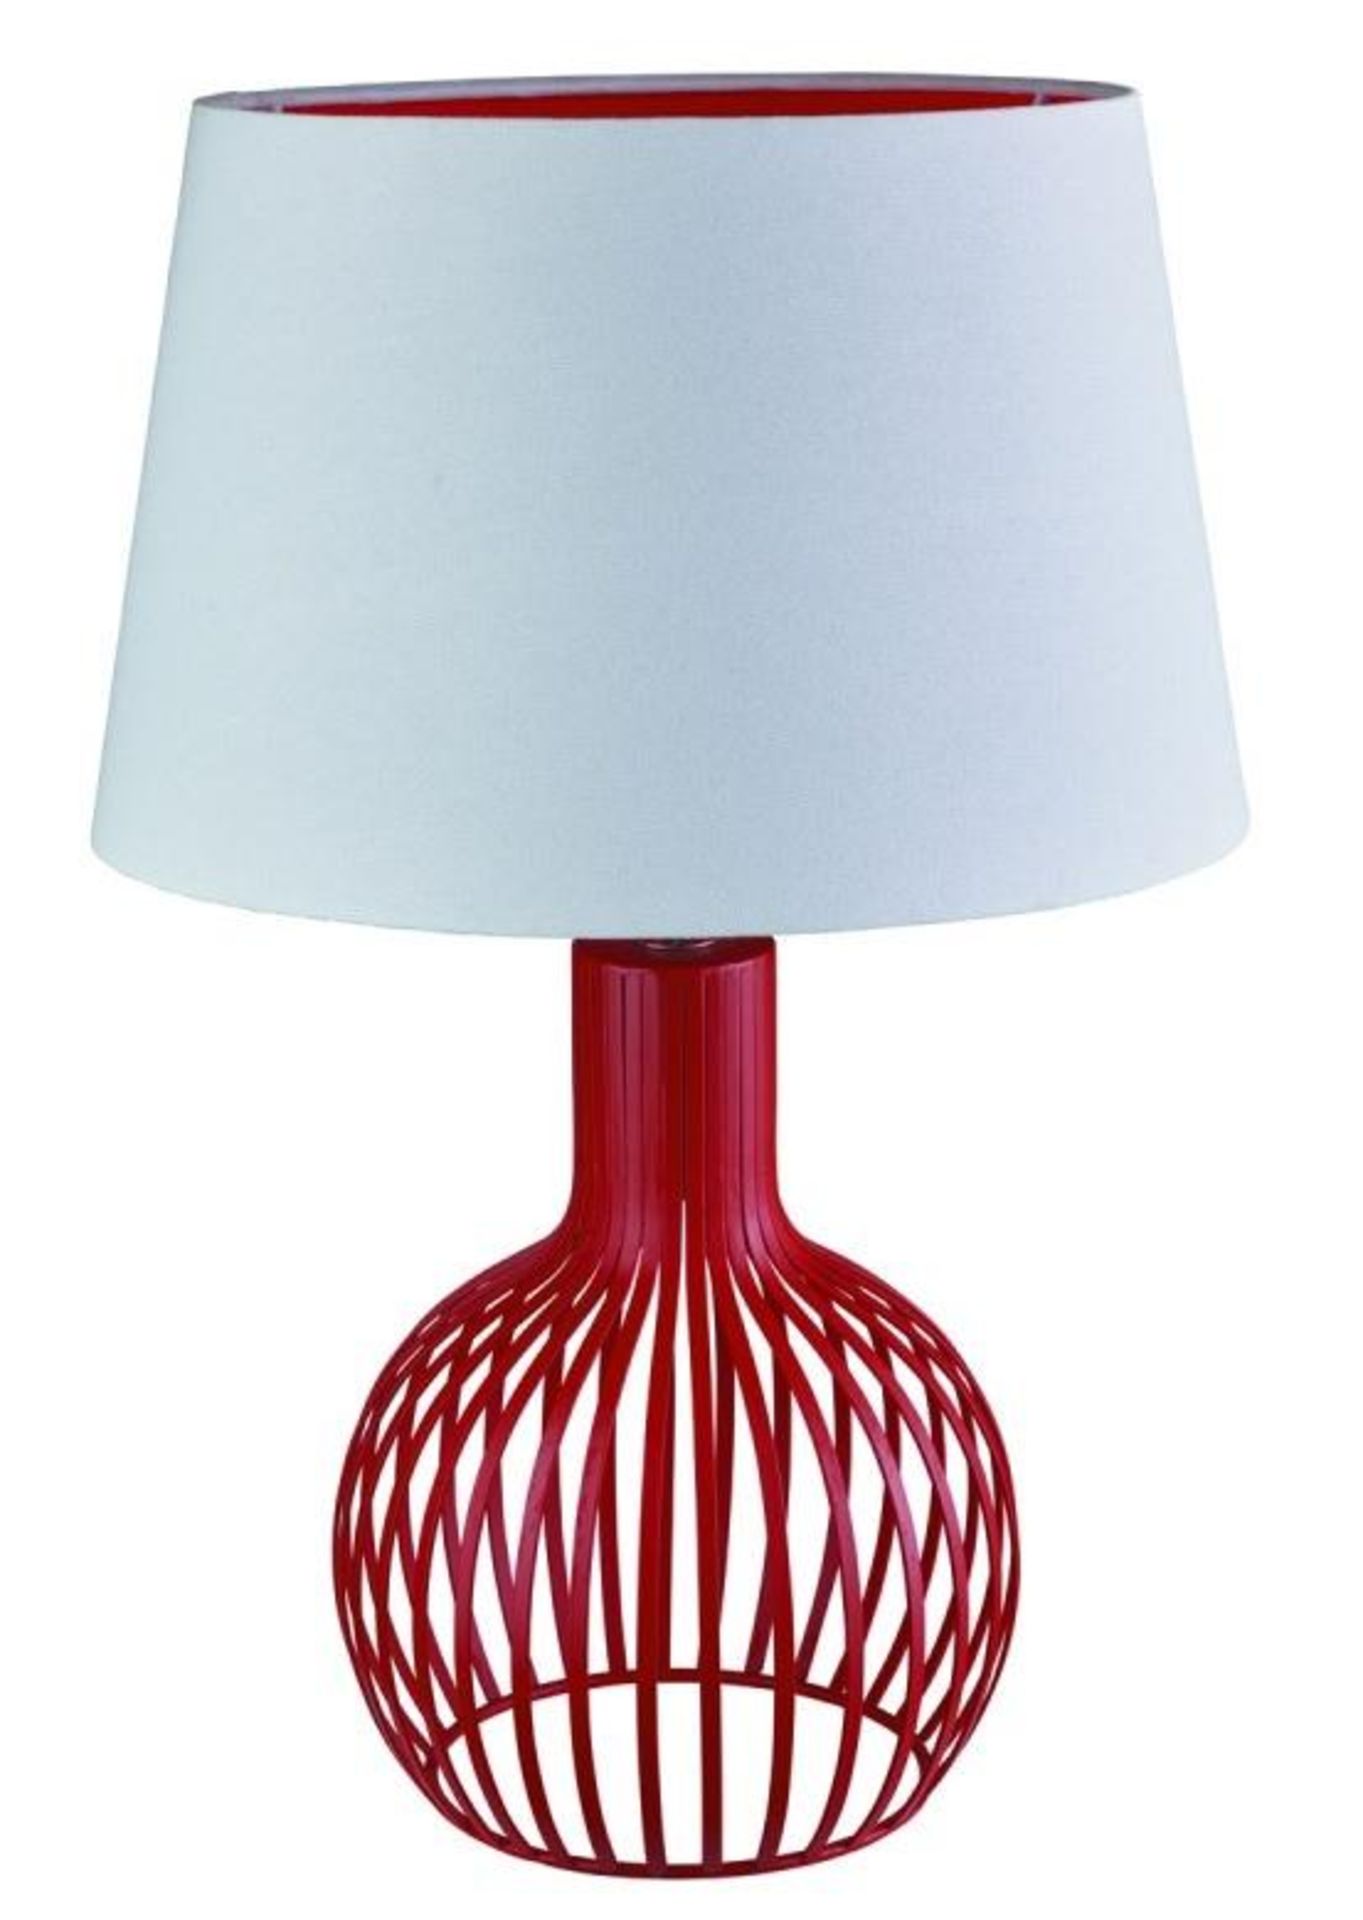 1 x Red Cage Table Lamp With White/Red Shade - Industry Influenced - New Boxed Stock - CL323 - Ref: